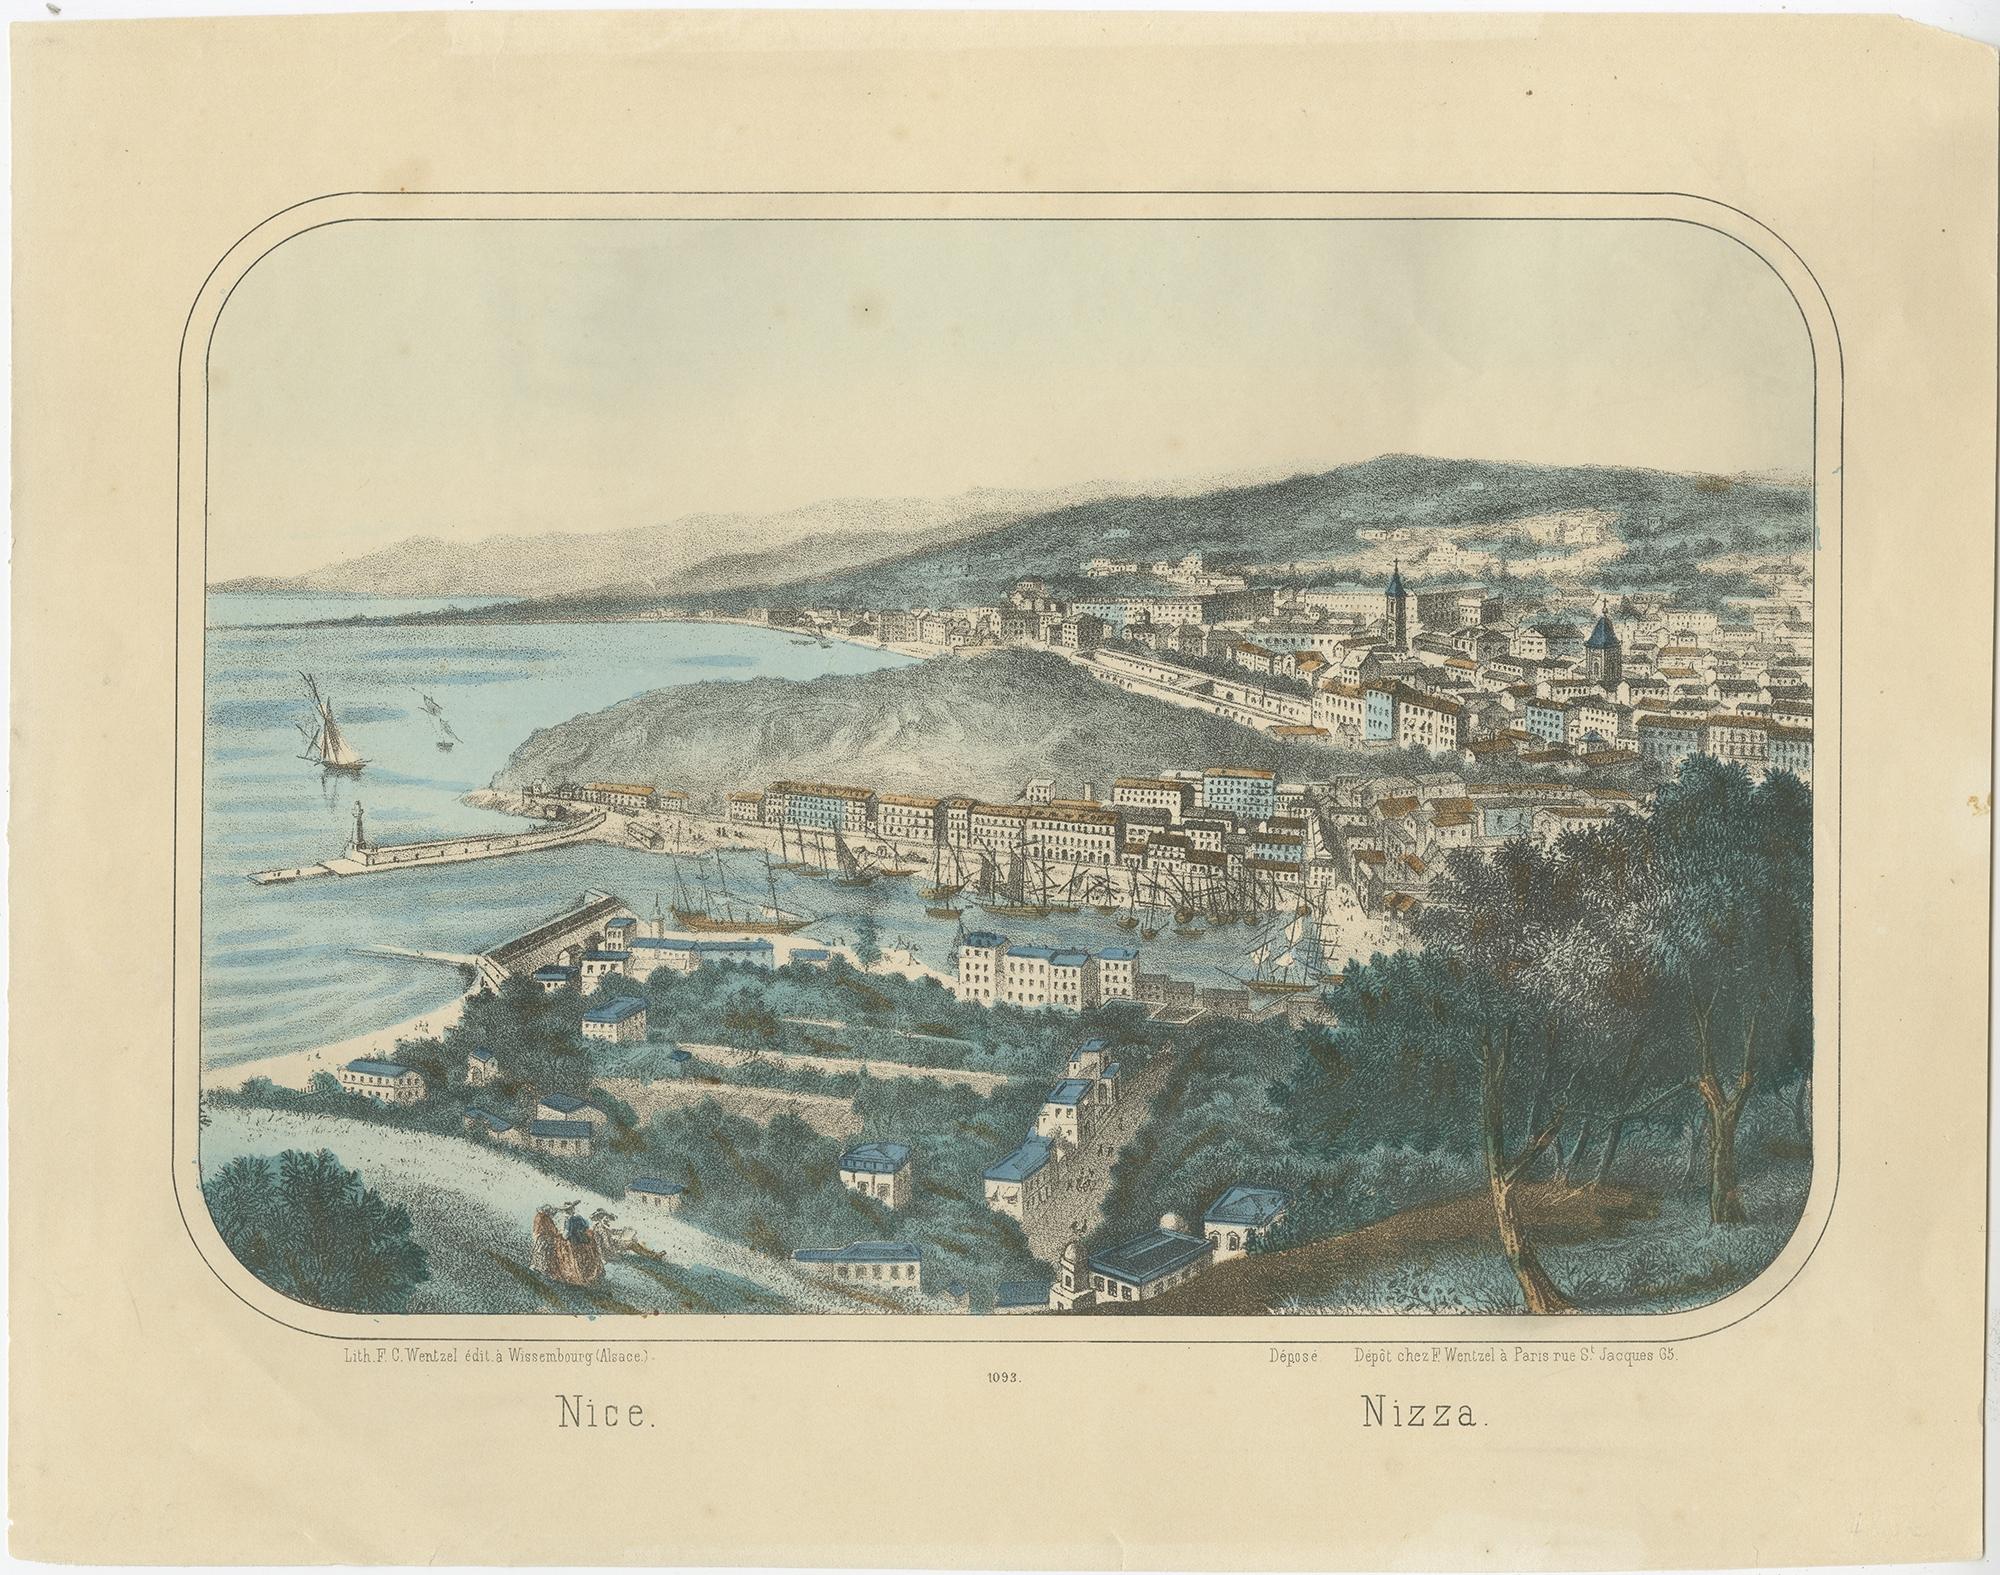 Description: Antique print titled 'Nice - Nizza'. 

View of the city of Nice, France. Source unknown, to be determined.

Artists and Engravers: Published by F. Wentzel. Jean Frédéric Wentzel (1807-1869), was an engraver, lithographer and printer